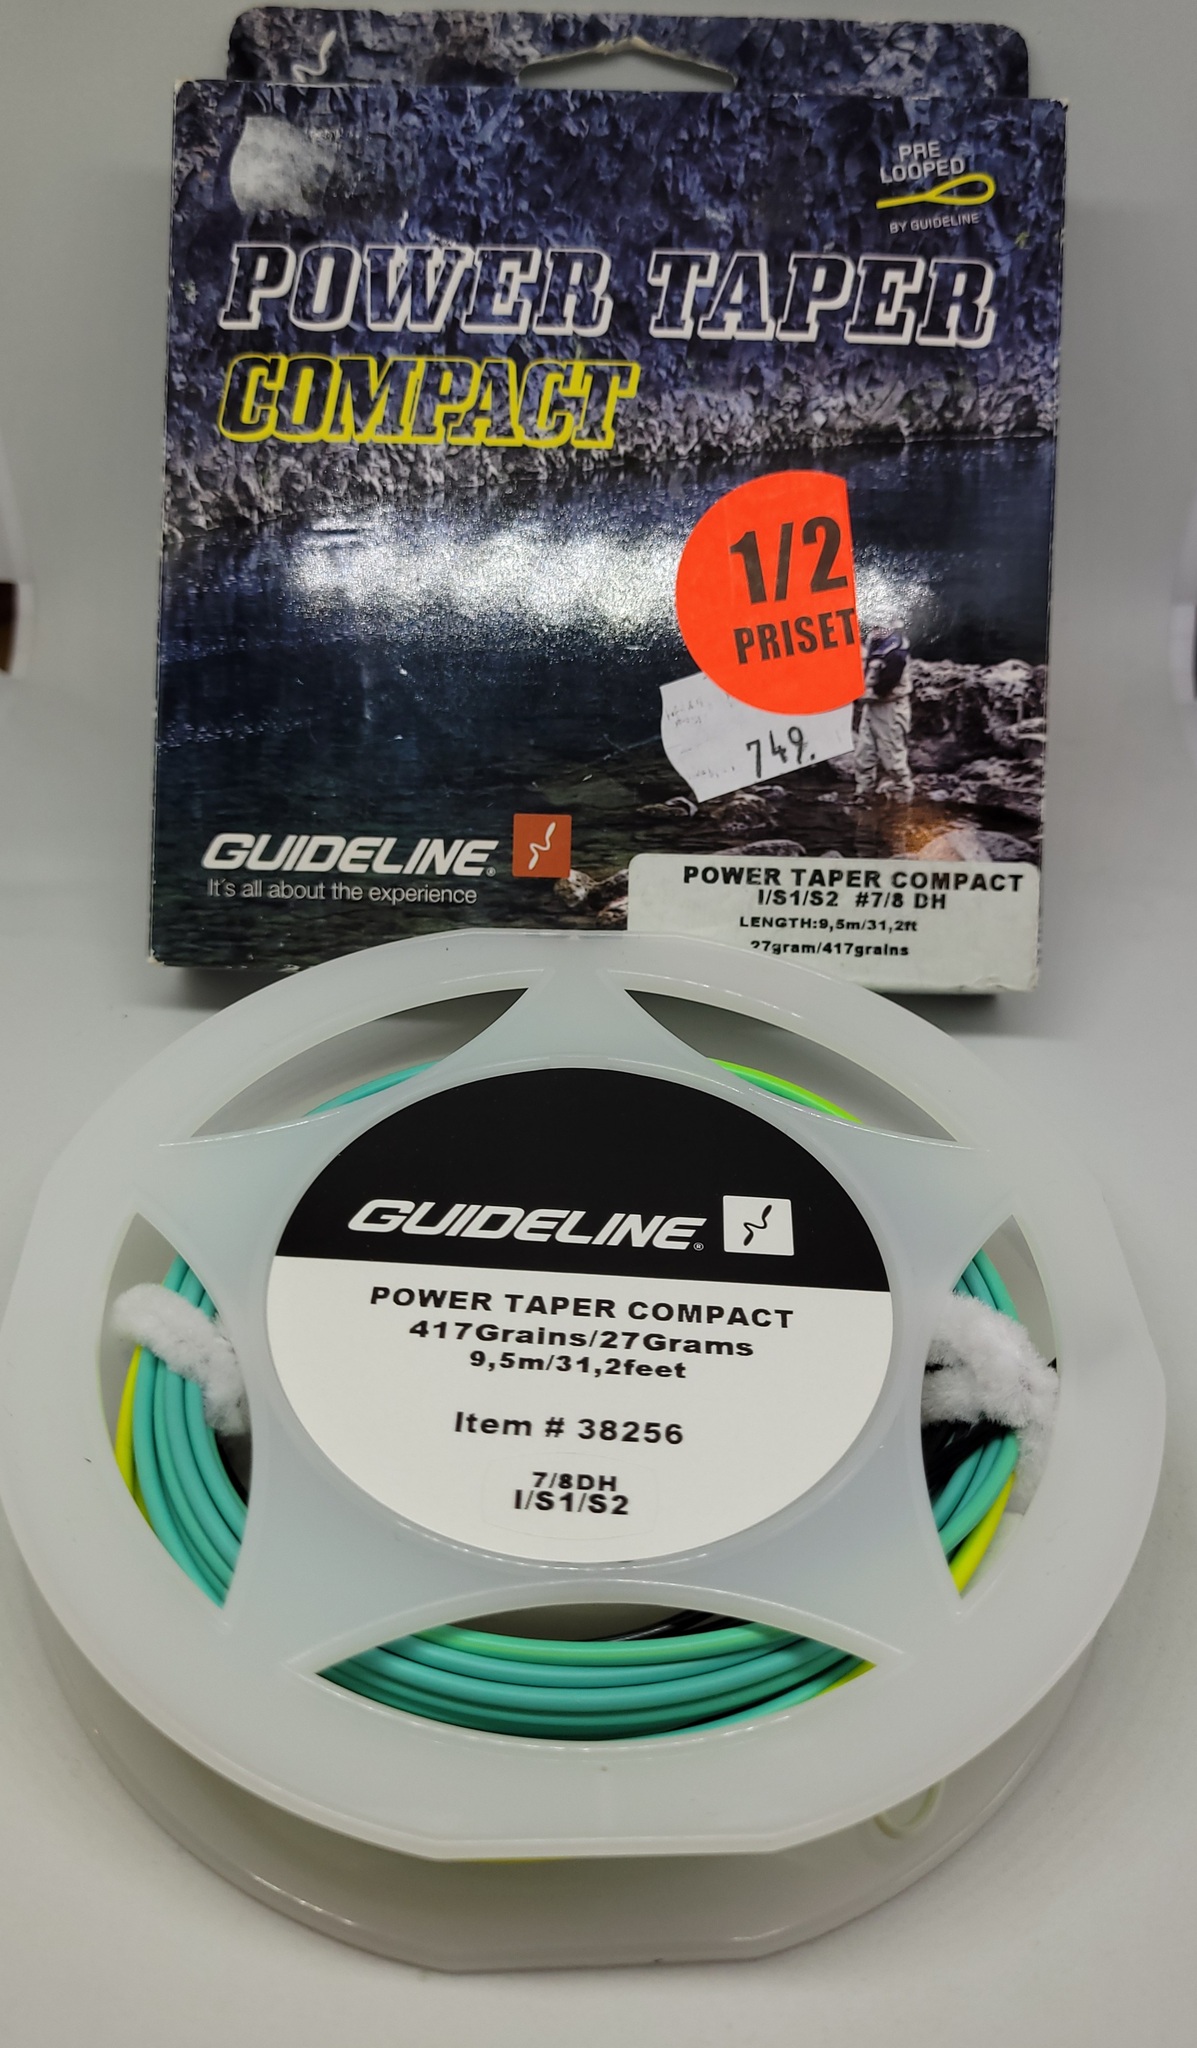 Guideline Power Taper Compact #7/8DH I/S1/S2 9,5m 27g